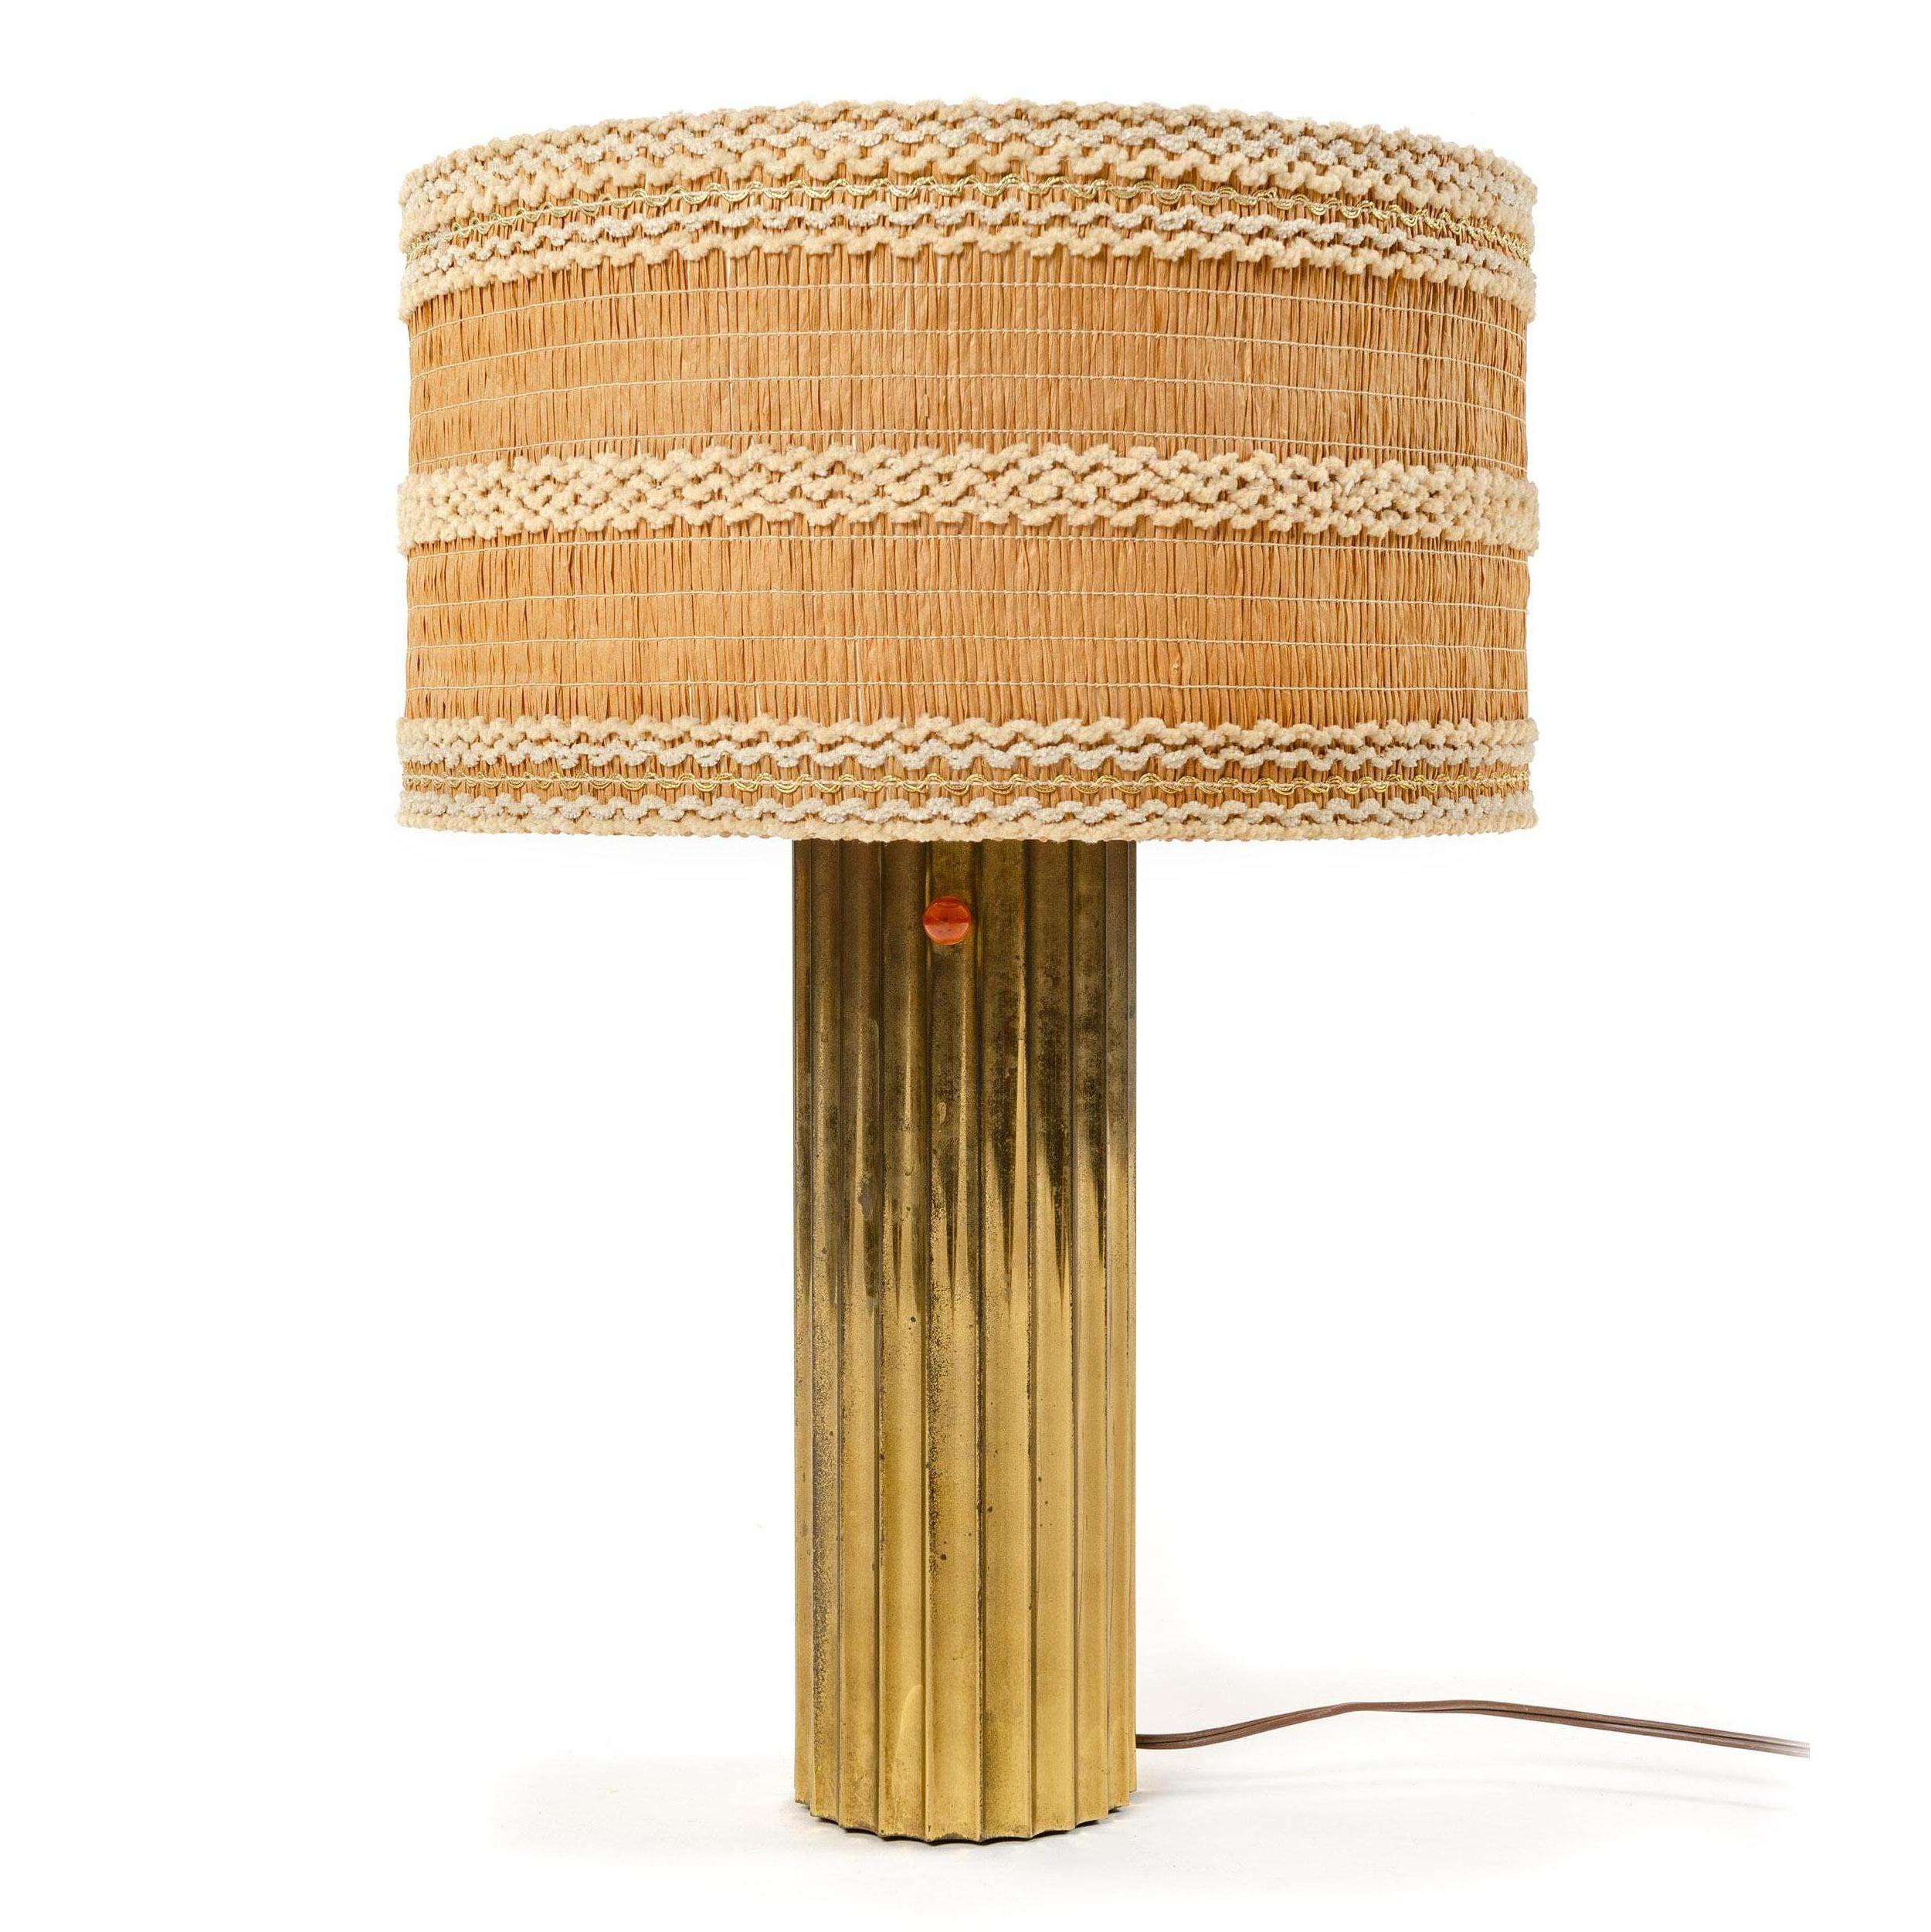 A corrugated patinated brass table lamp with a glass diffuser shade to direct light upwards and a fabric shade to soften the glow.